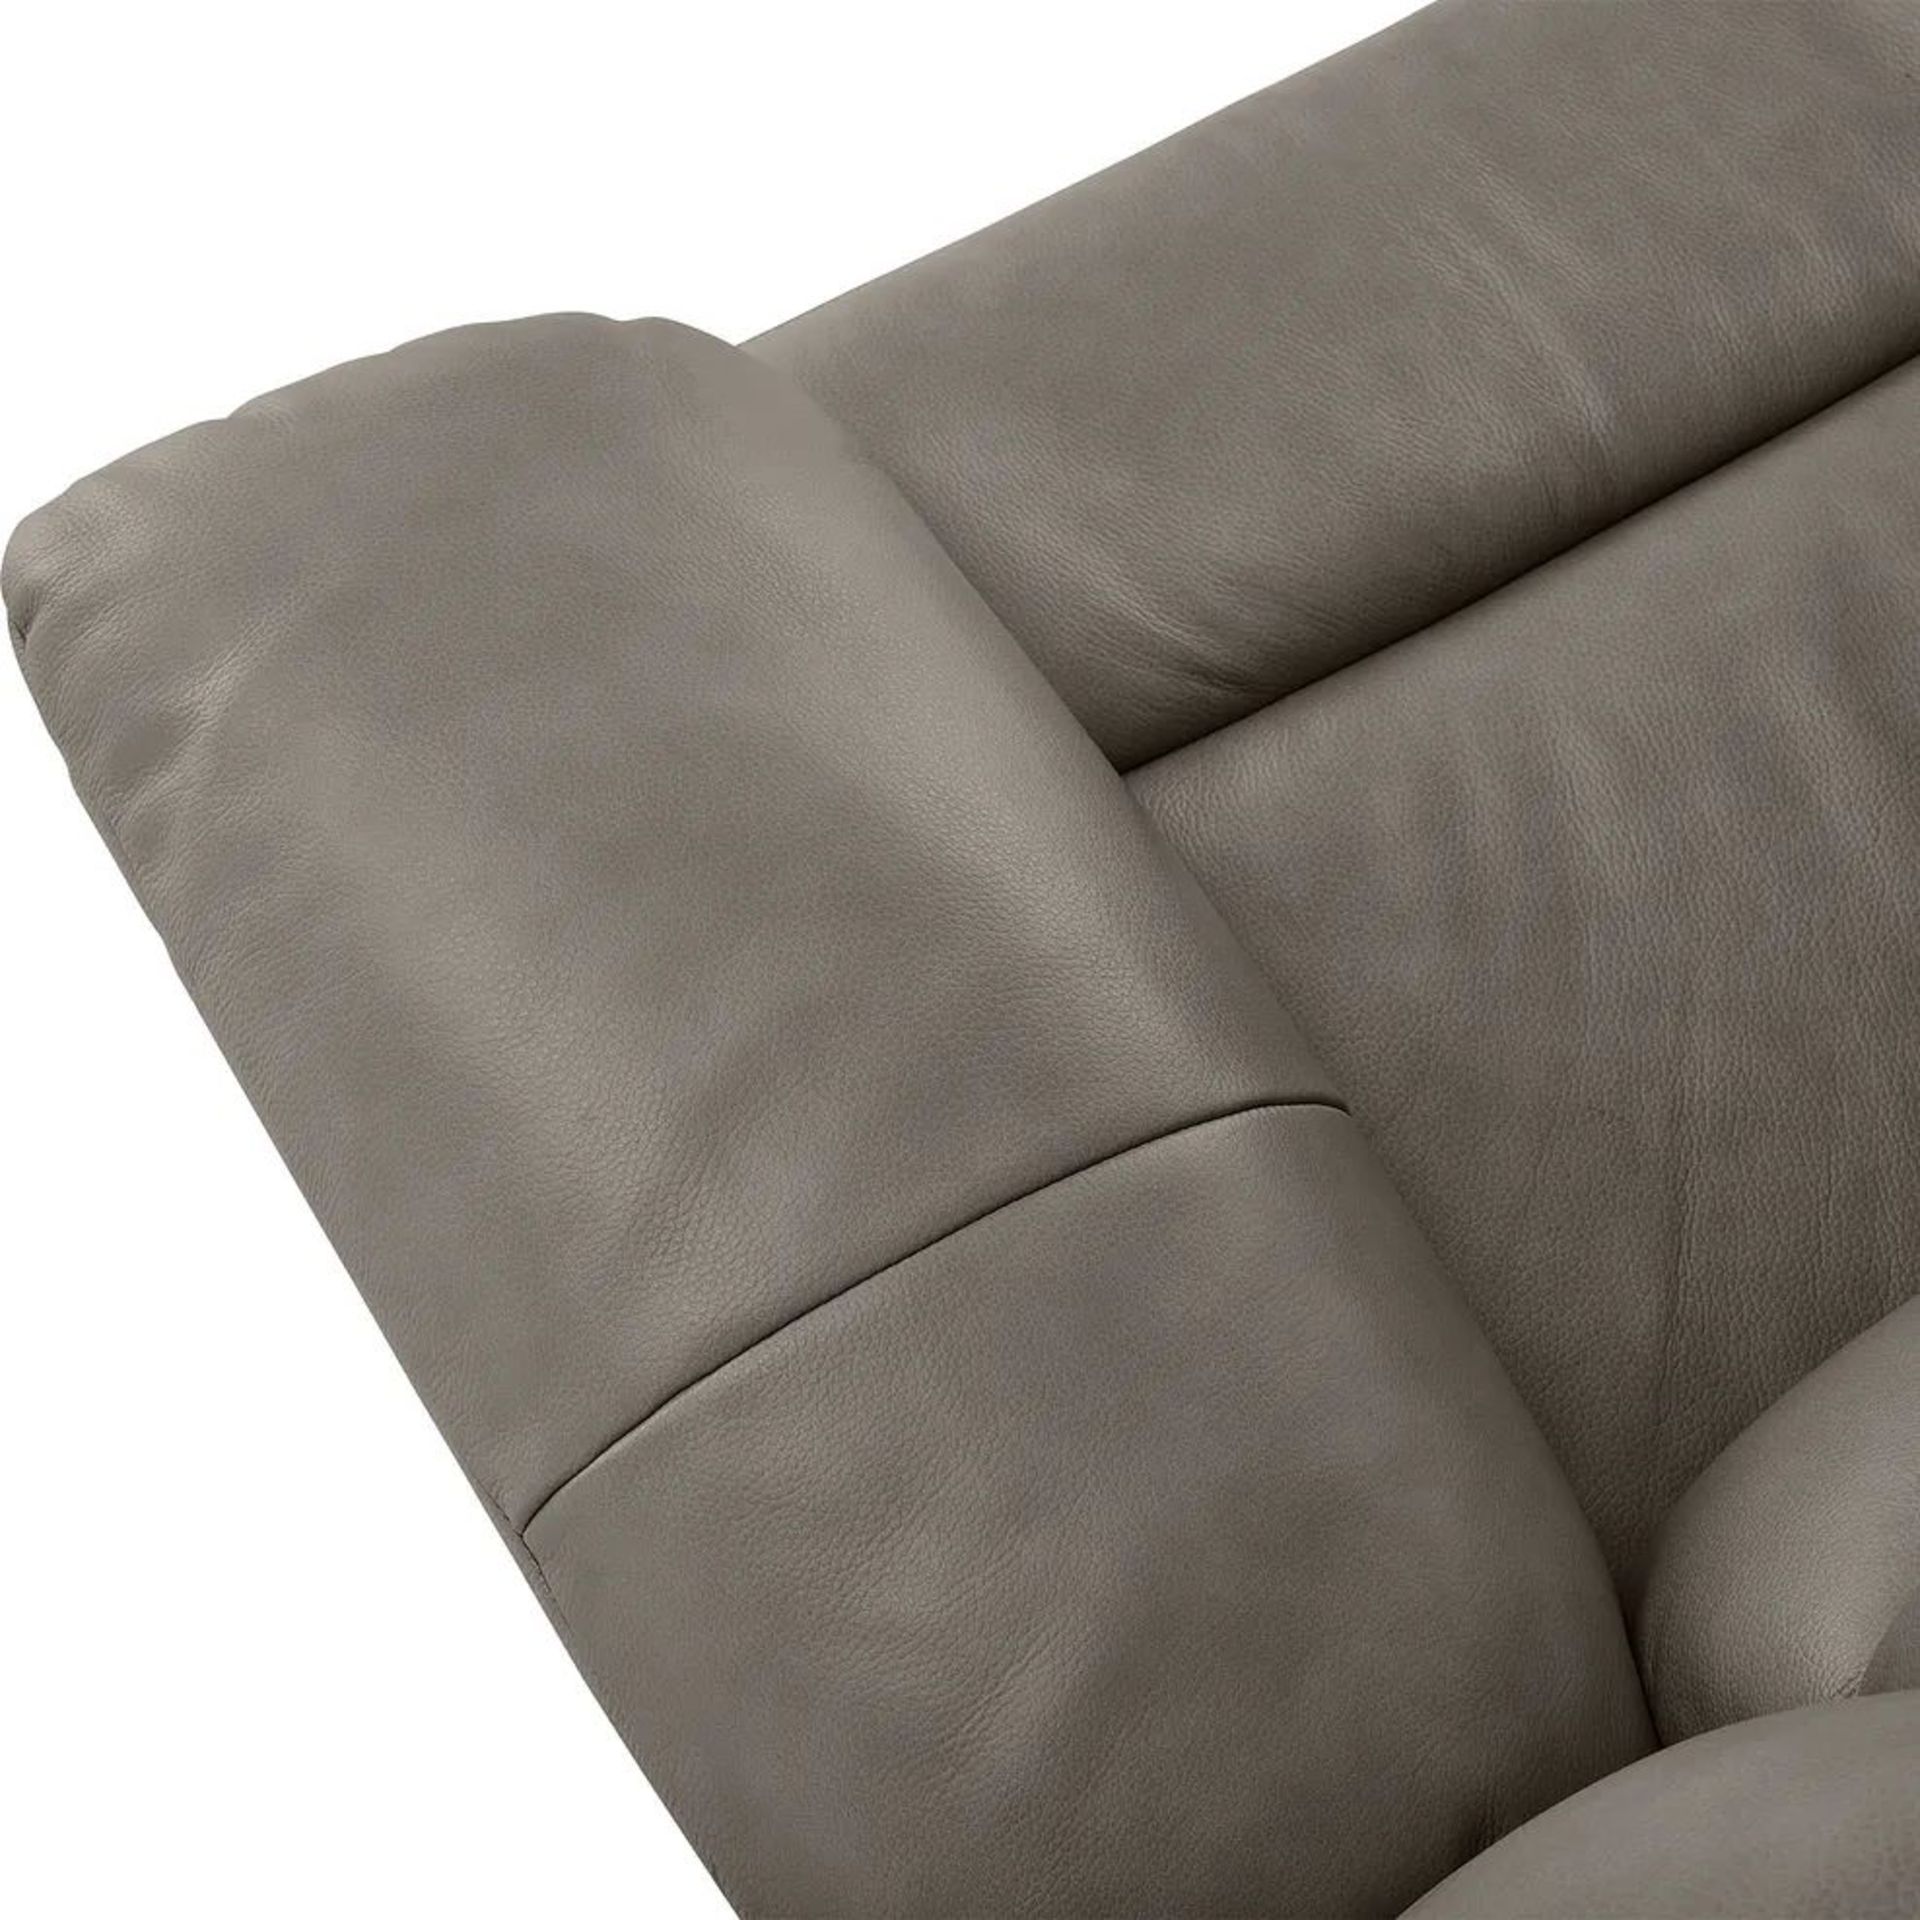 BRAND NEW MARLOW 3 Seater Electric Recliner Sofa - DARK GREY LEATHER. RRP £1849. Our Marlow - Image 10 of 11